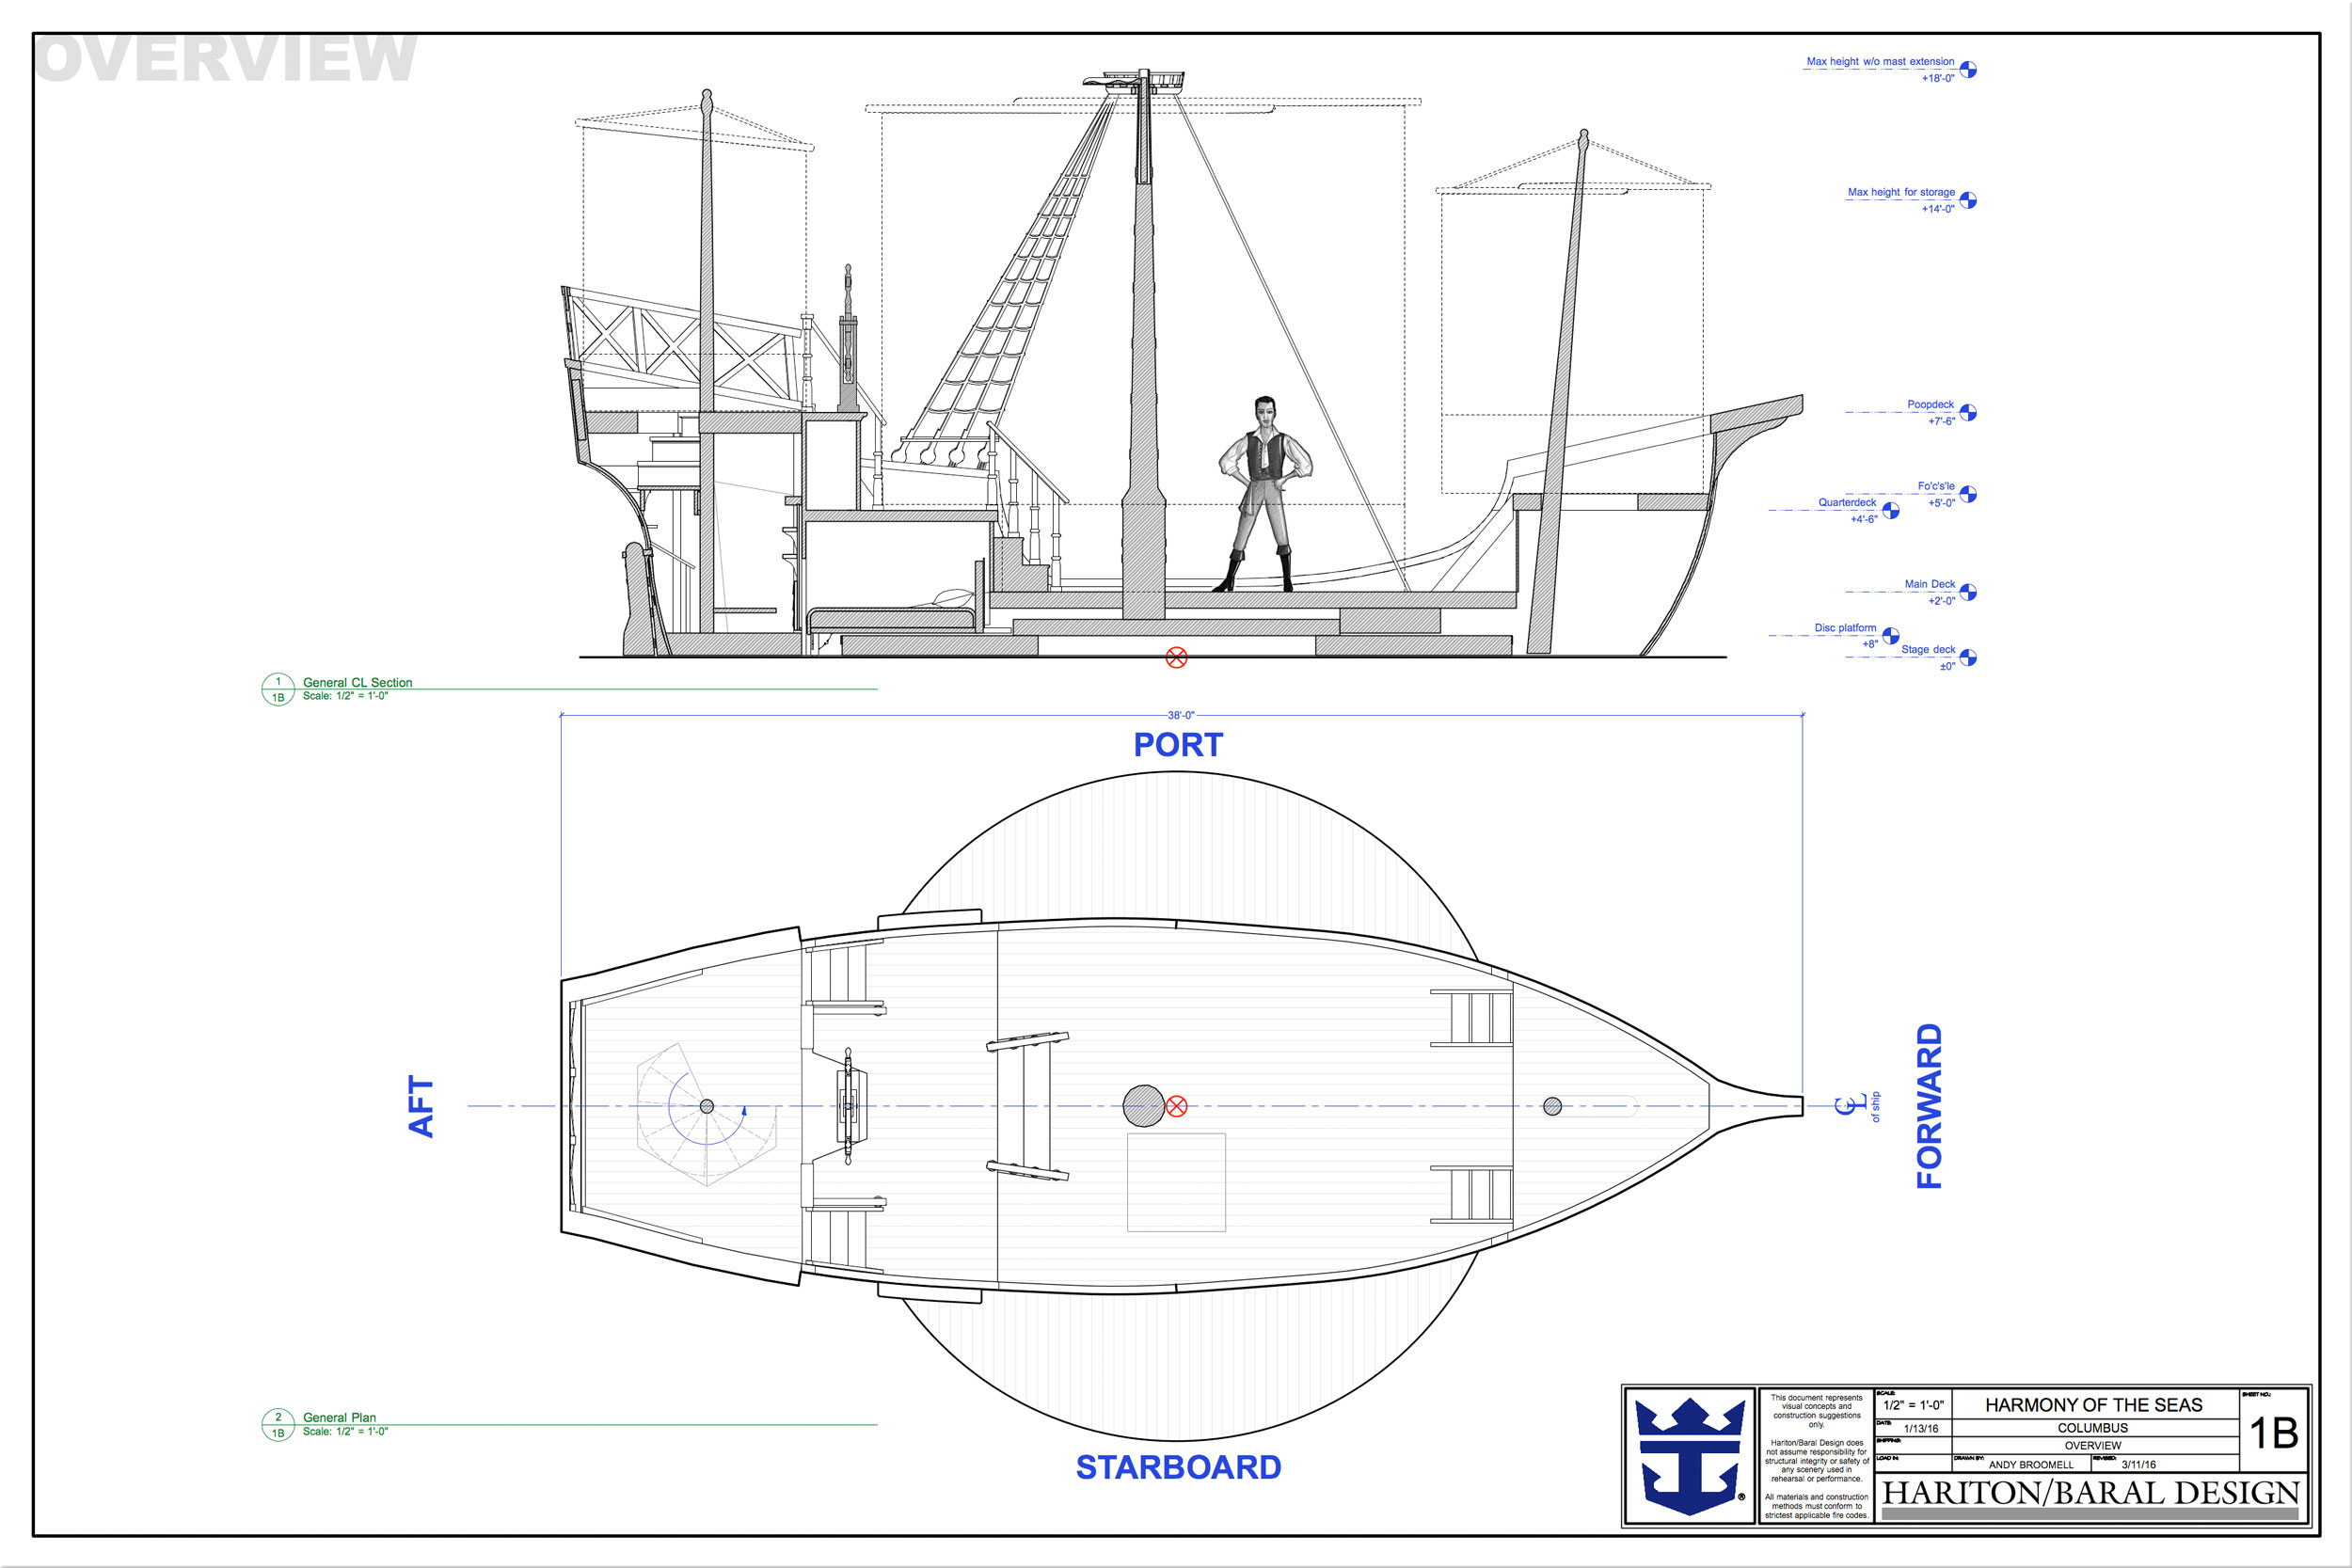 andy-broomell-drafting-columbus2-musical-vectorworks-scenic-design-scenery-plans-sailing-ship.jpg